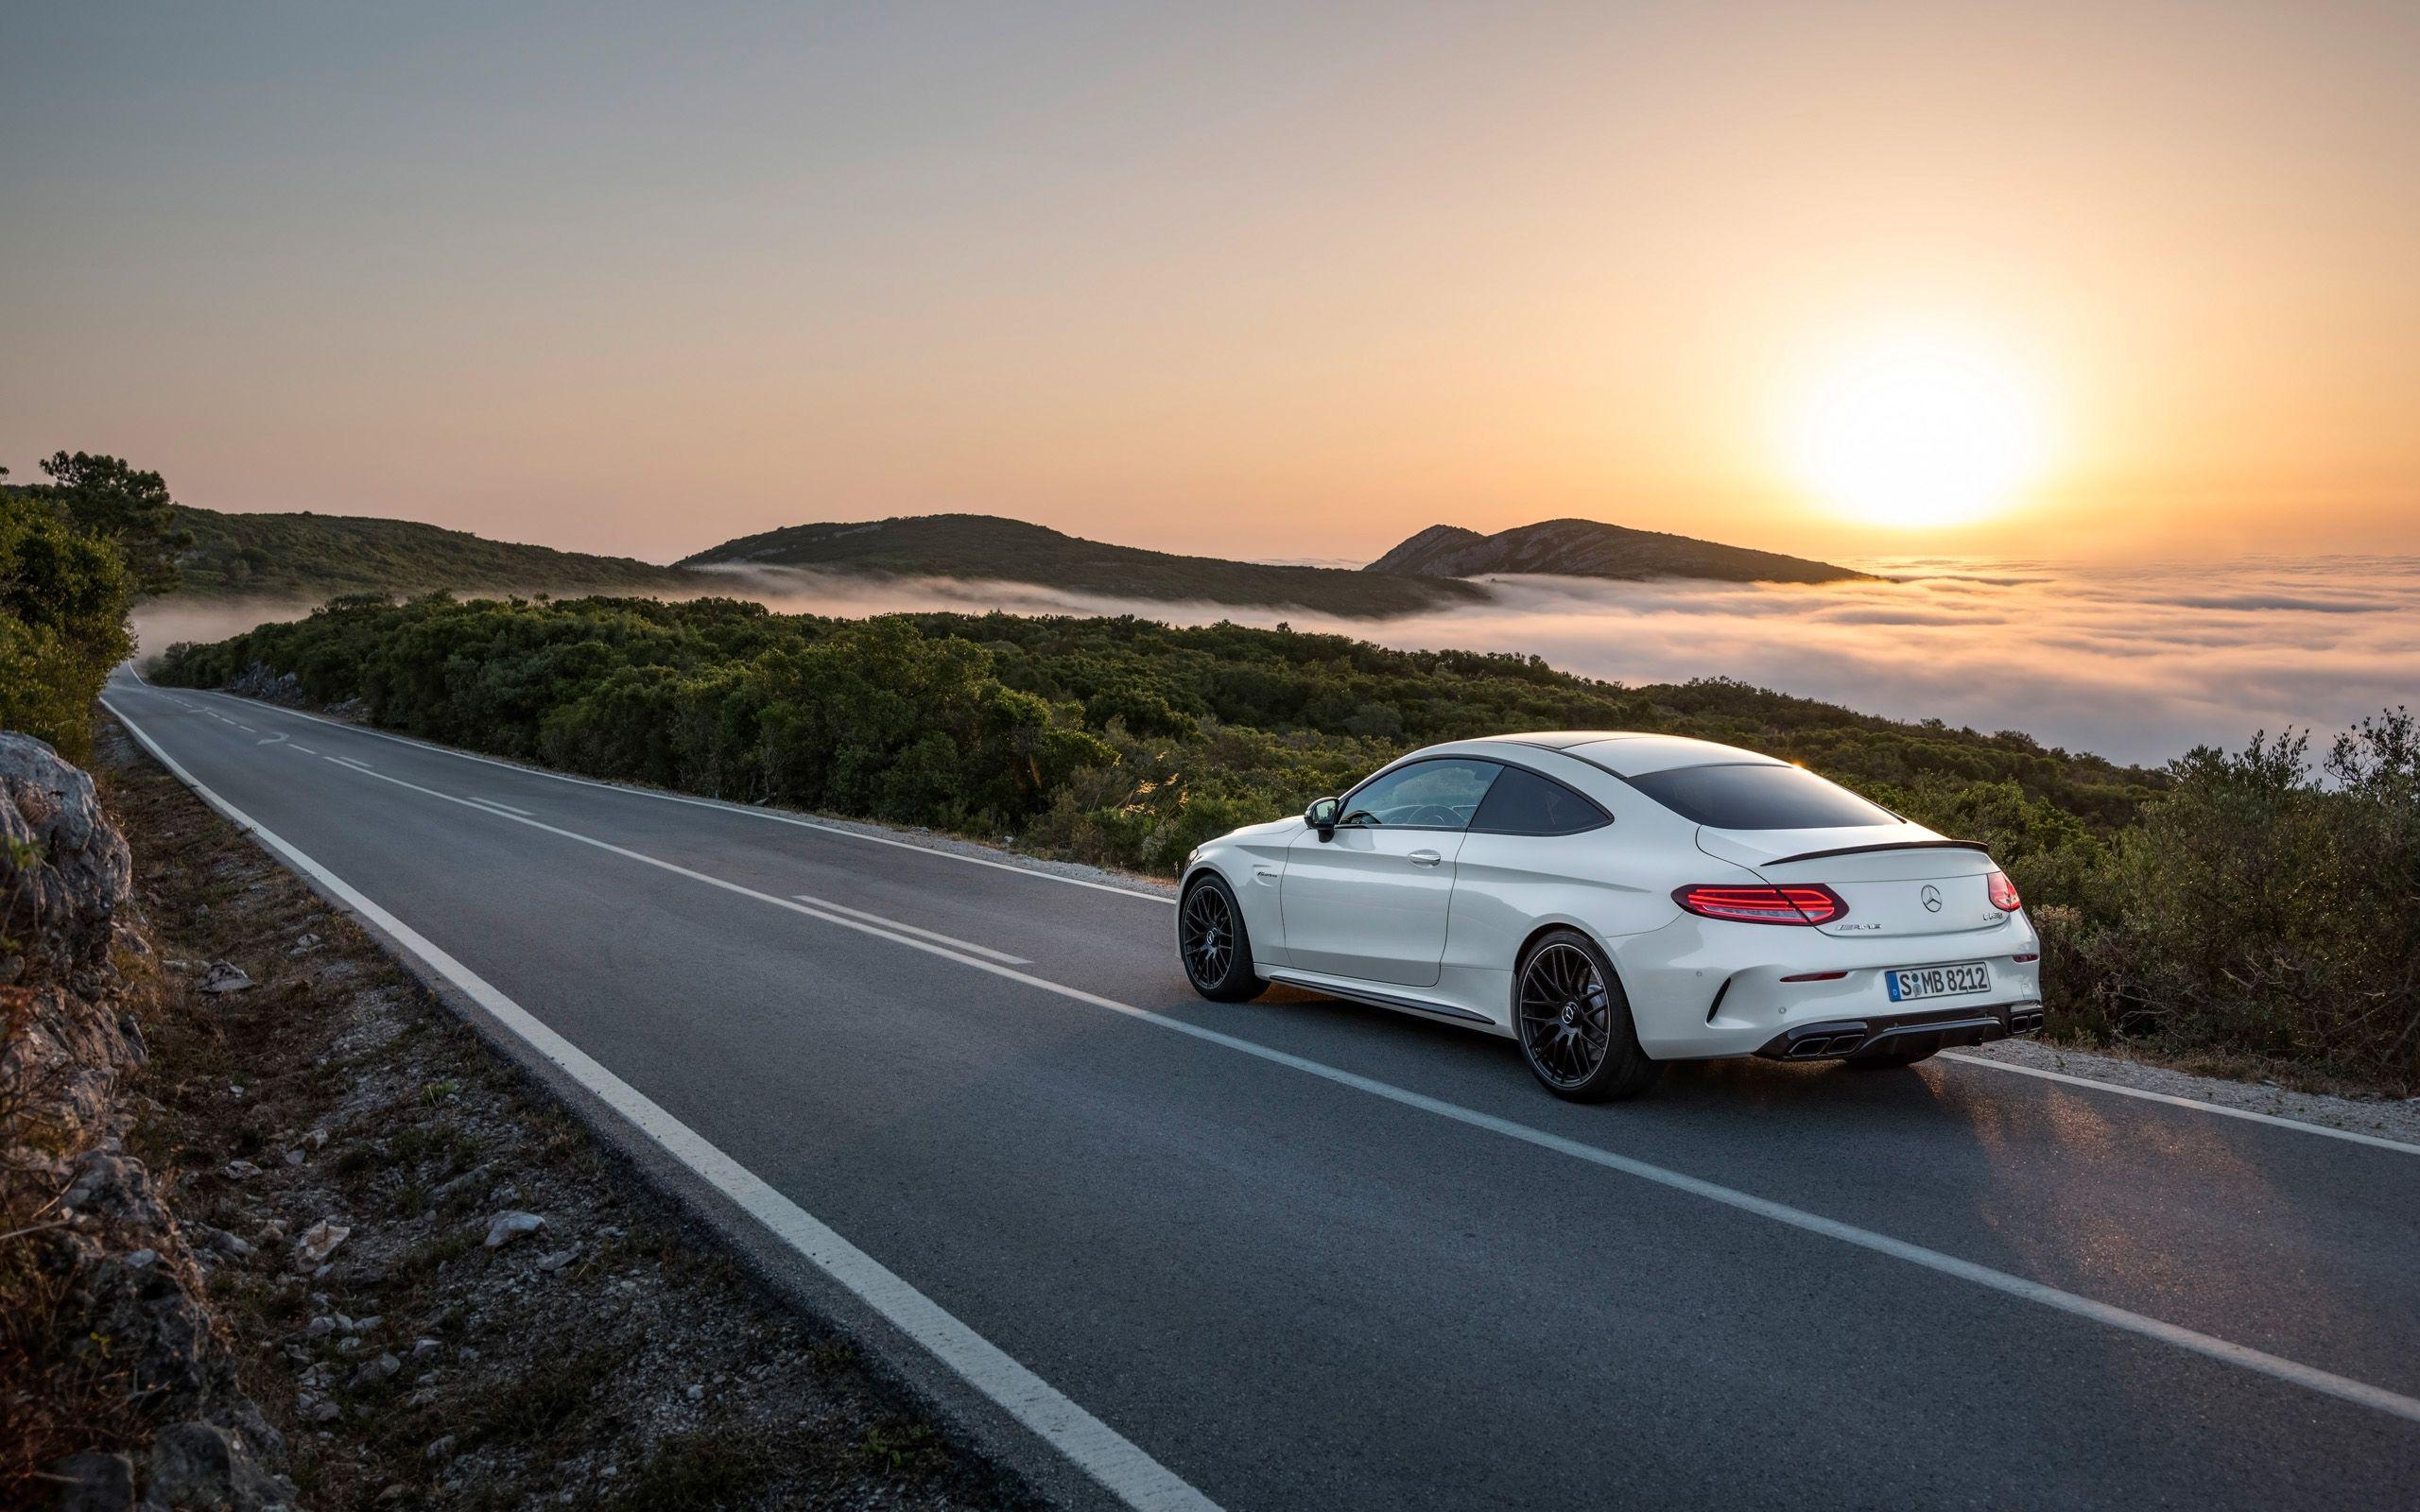 Mercedes AMG C63 S Coupe Wallpapers